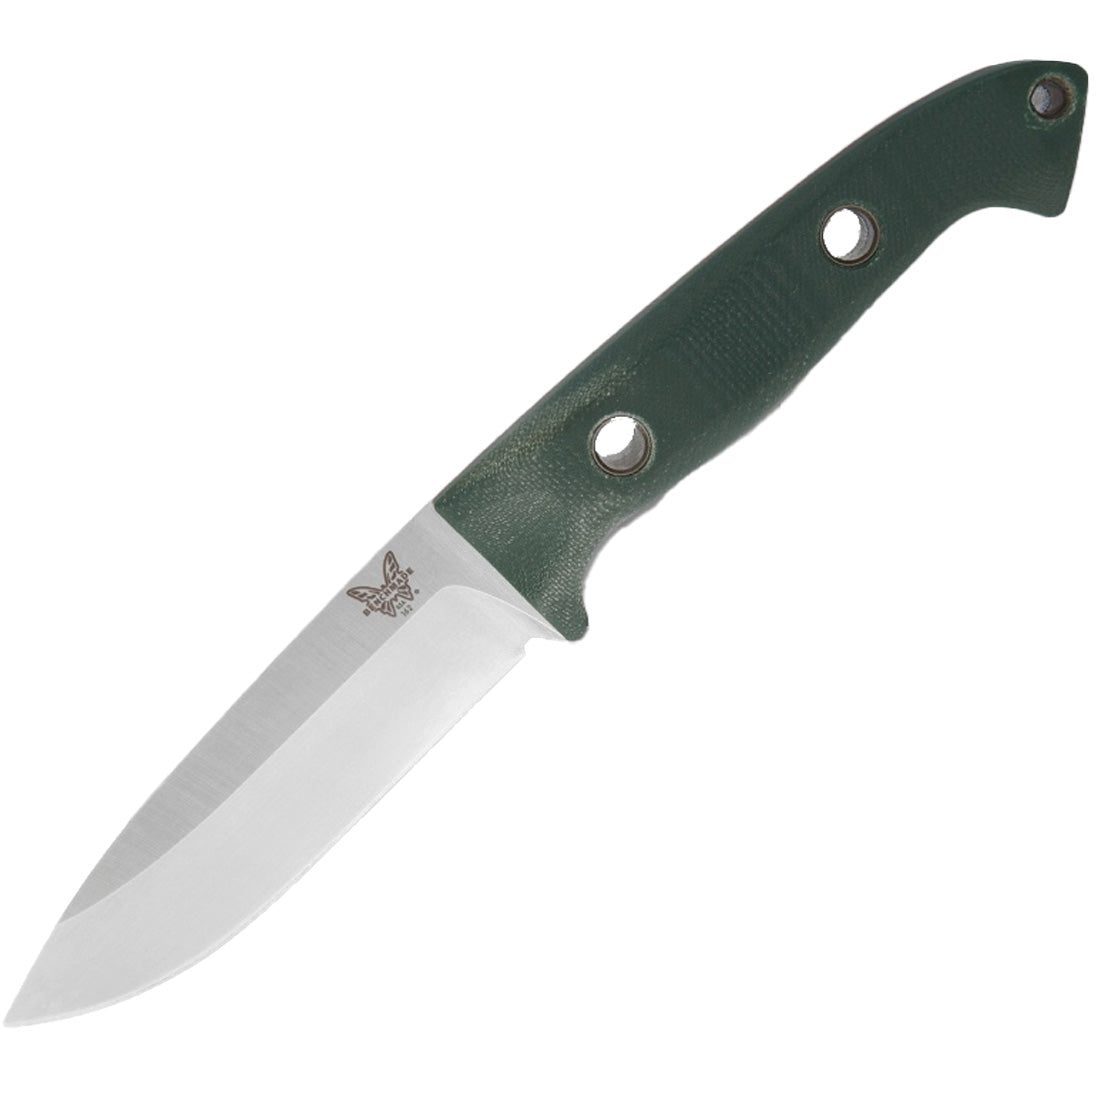  9.1 Inch Buschcrafter 162 Fixed Blade Knife with Sheath,  Outdoor Hunting Knife with 3.9 Inch 7Cr17Mov Blade Green G10 Handle, Full  Tang Knife for Camping Fishing : Sports & Outdoors